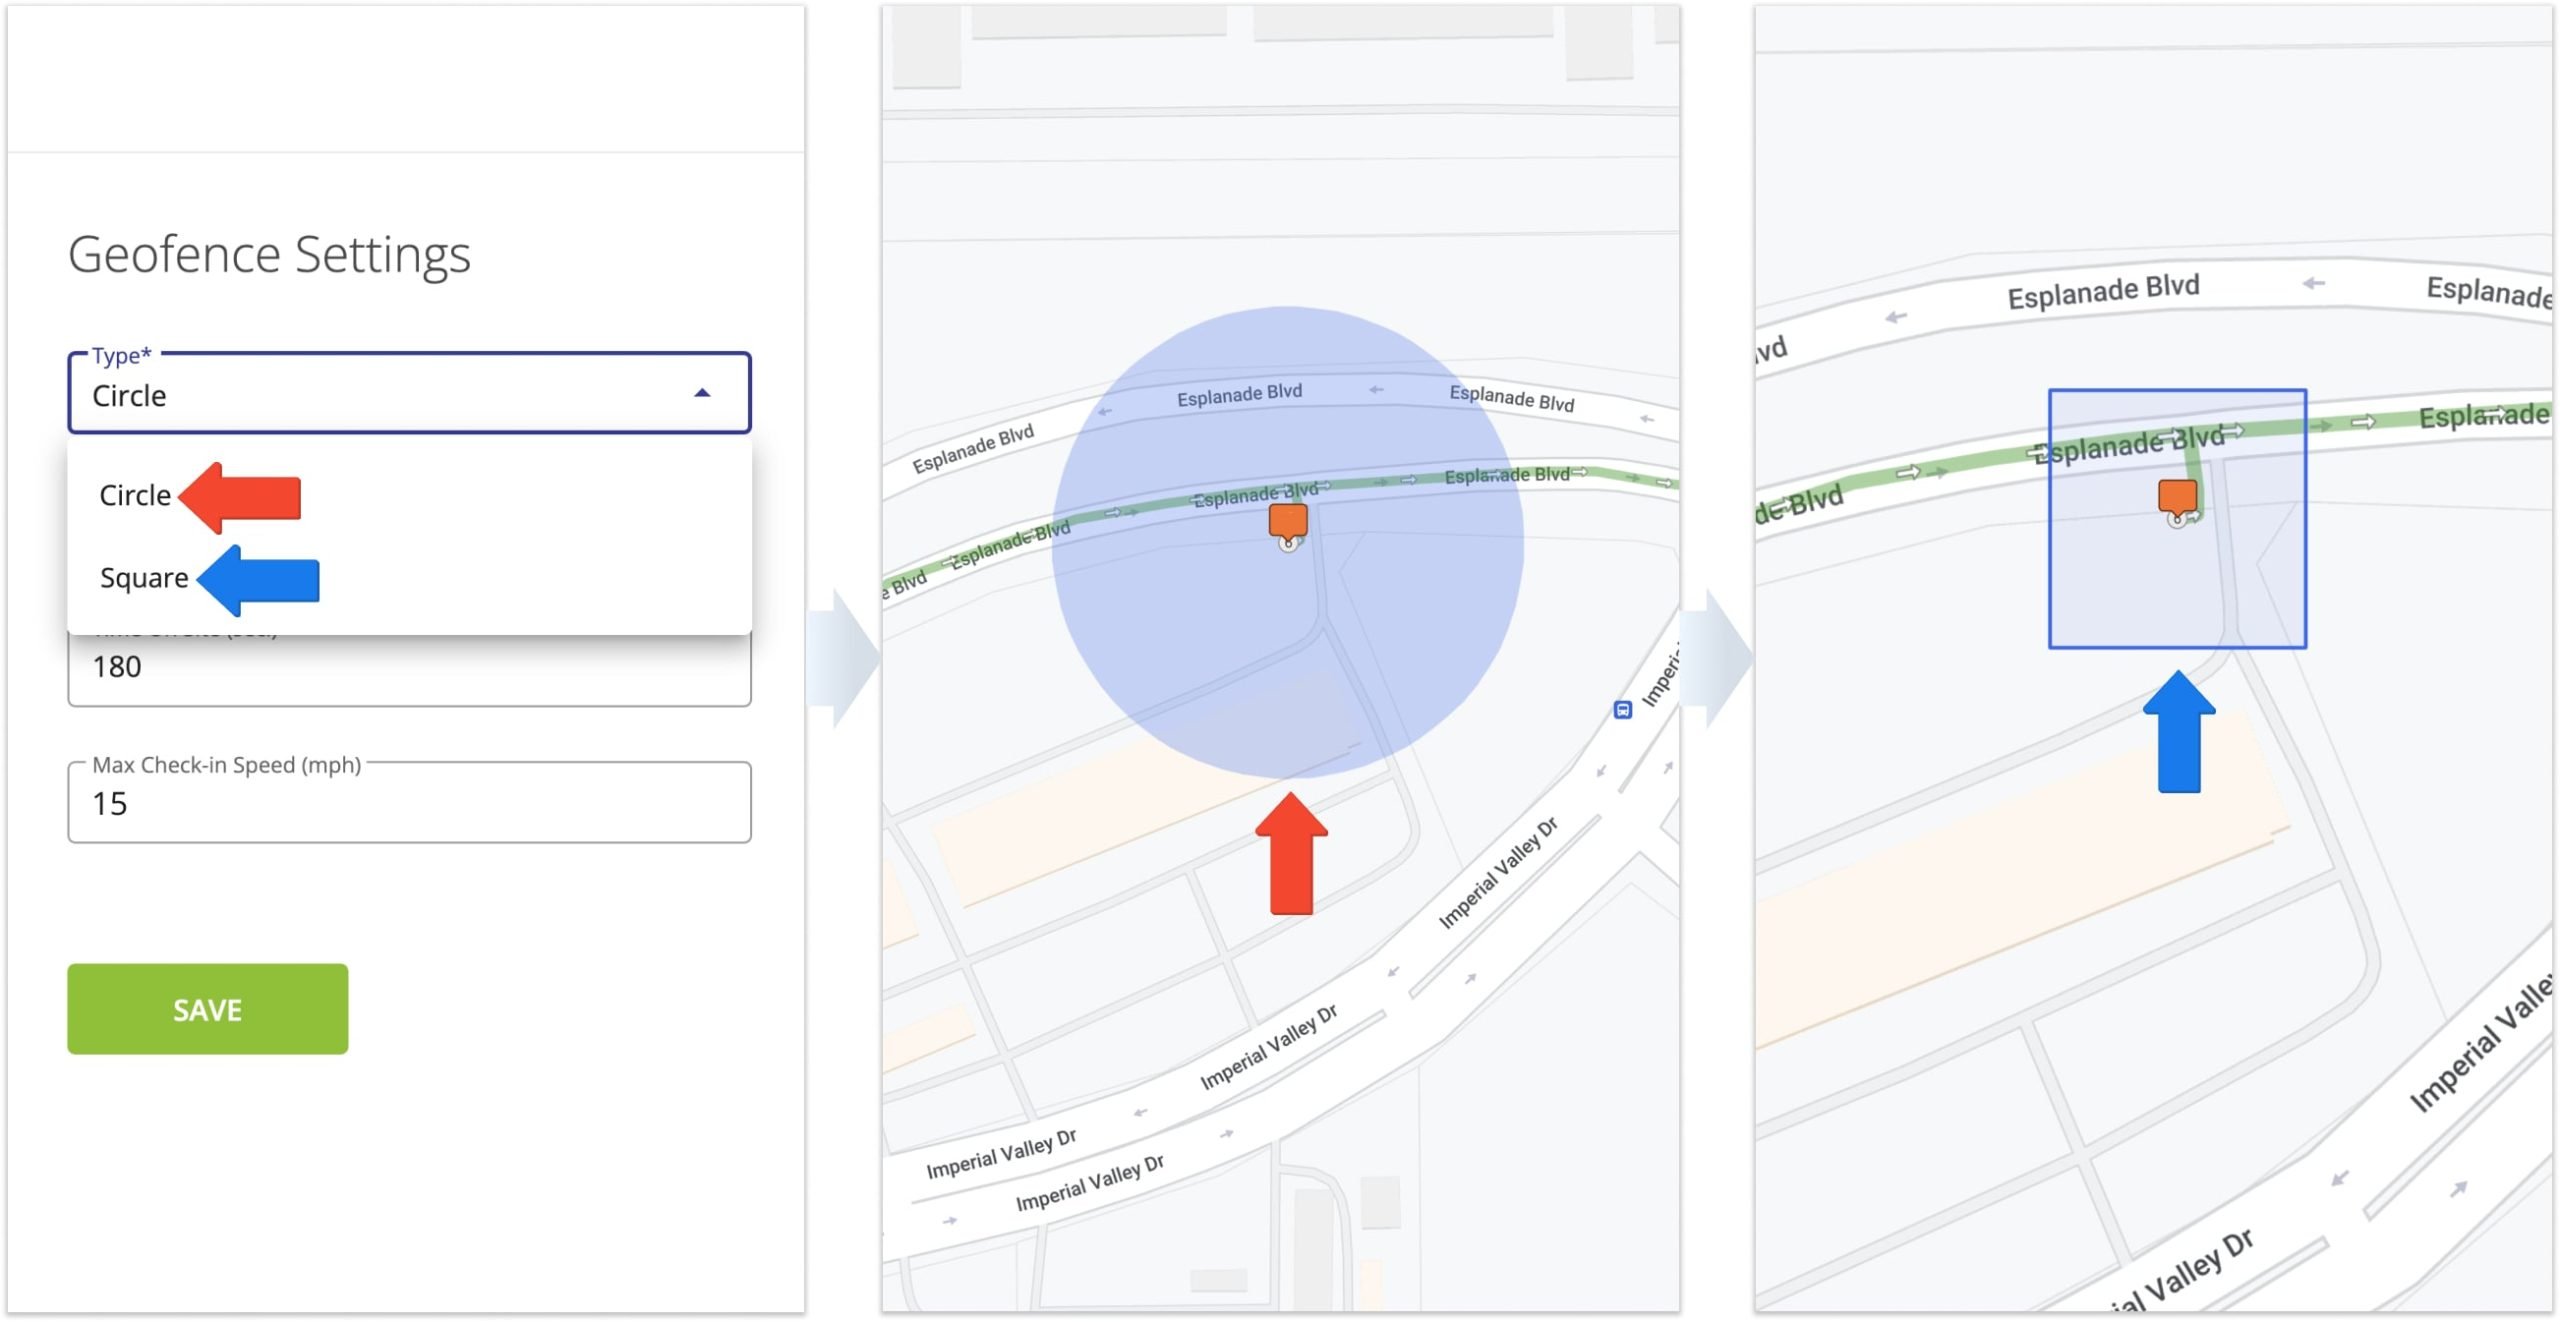 You can select your Geofence Type between square and circle, depending on your routing or tracking needs.